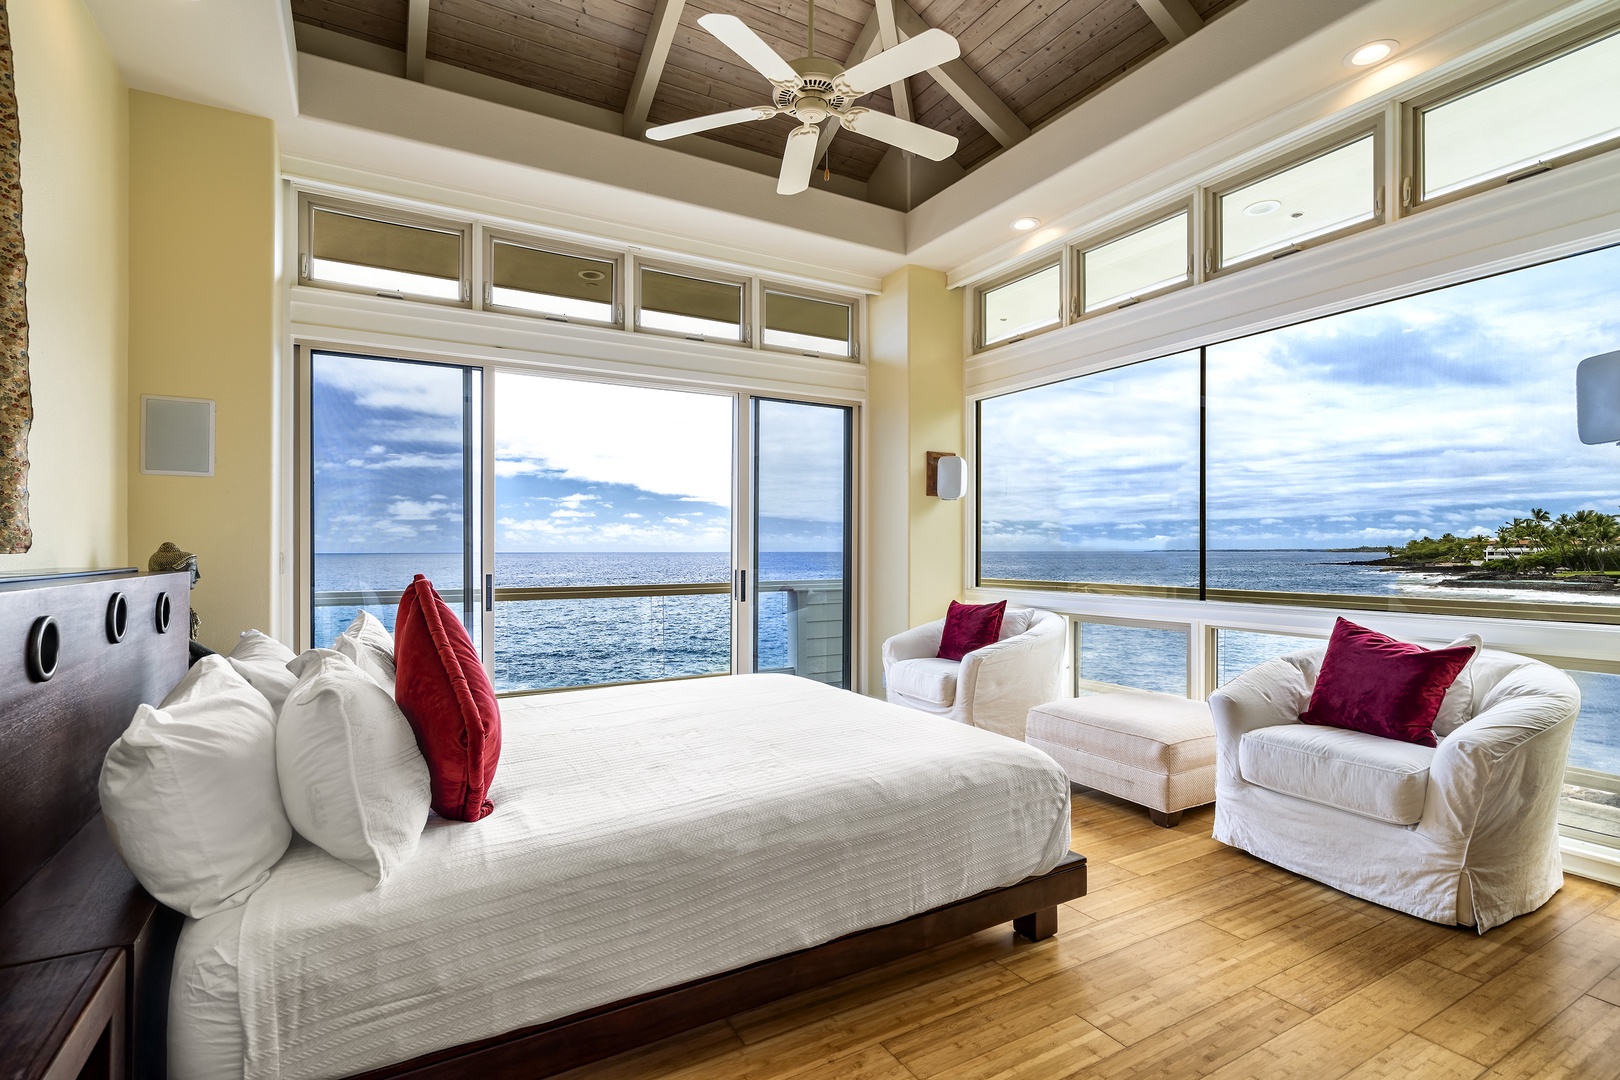 Kailua Kona Vacation Rentals, Ali'i Point #12 - Primary bedroom fit for royalty